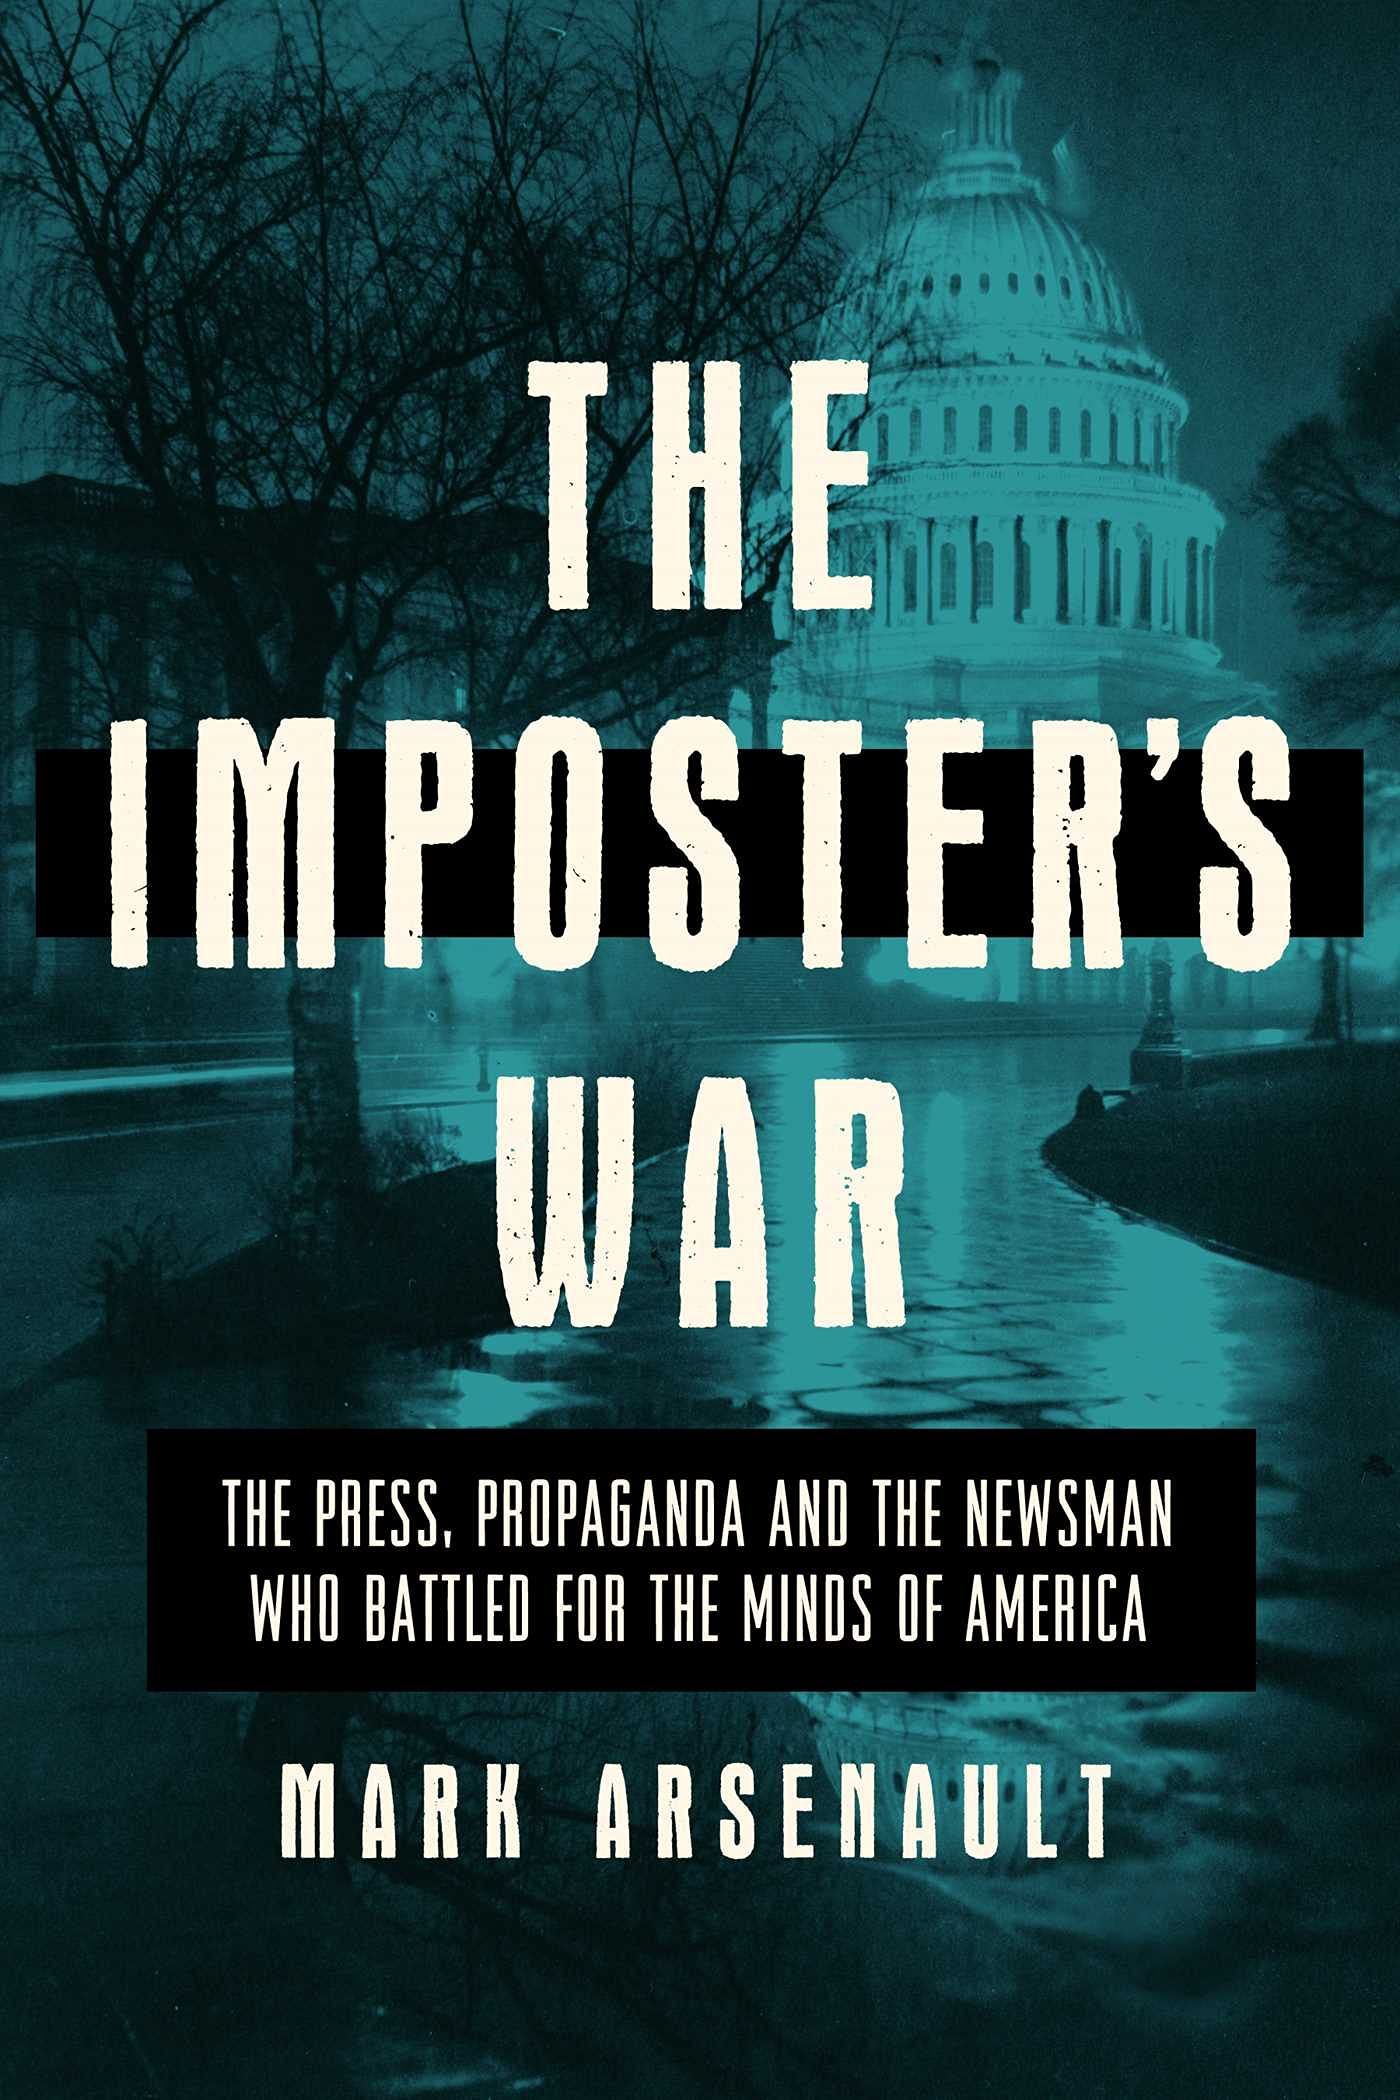 The Imposter's War : The Press, Propaganda, and the Newsman who Battled for the Minds of America